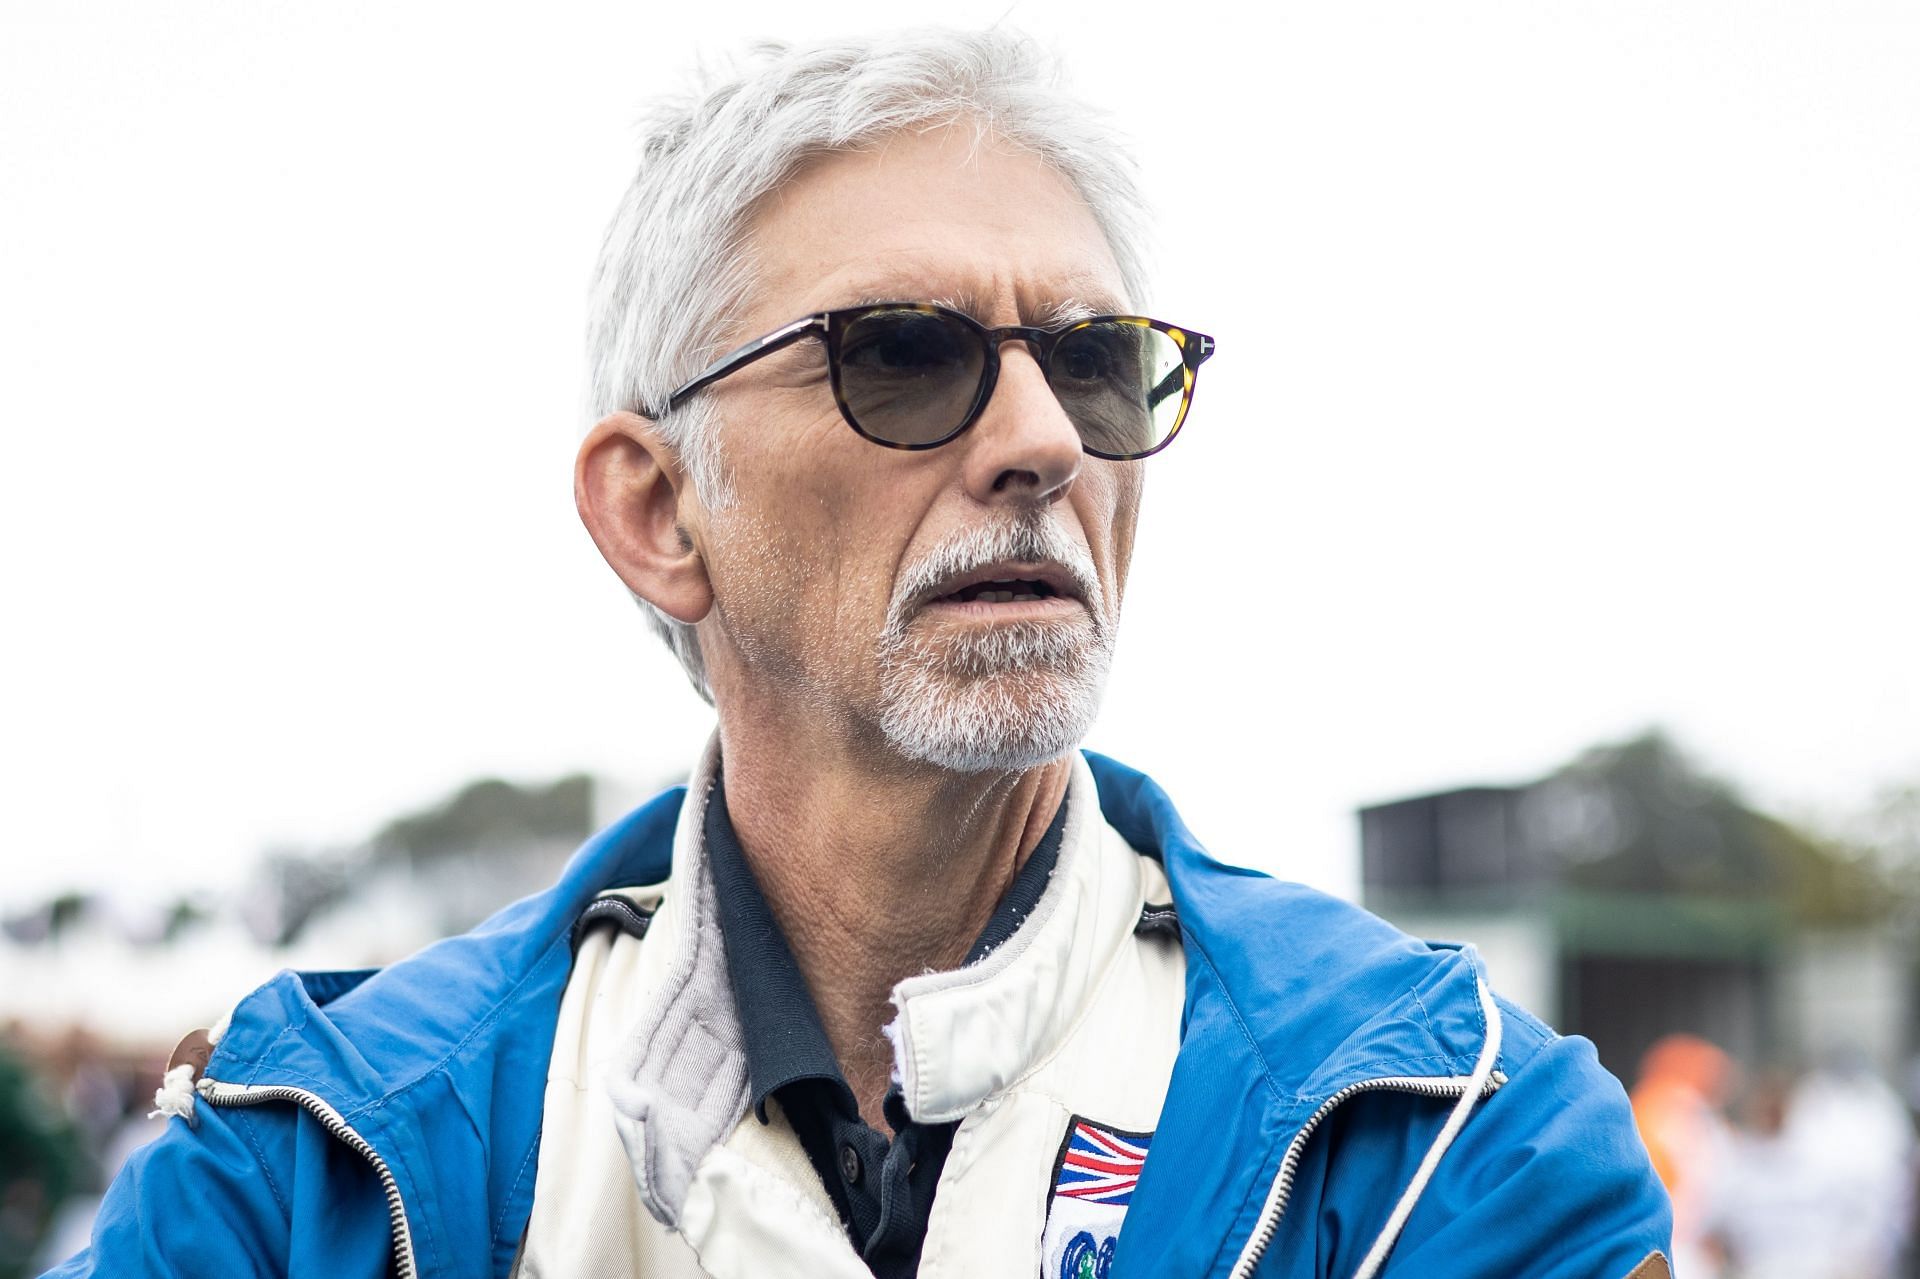 Goodwood Festival of Speed 2021 - Damon Hill makes an appearance at the iconic event (Photo by James Bearne/Getty Images)